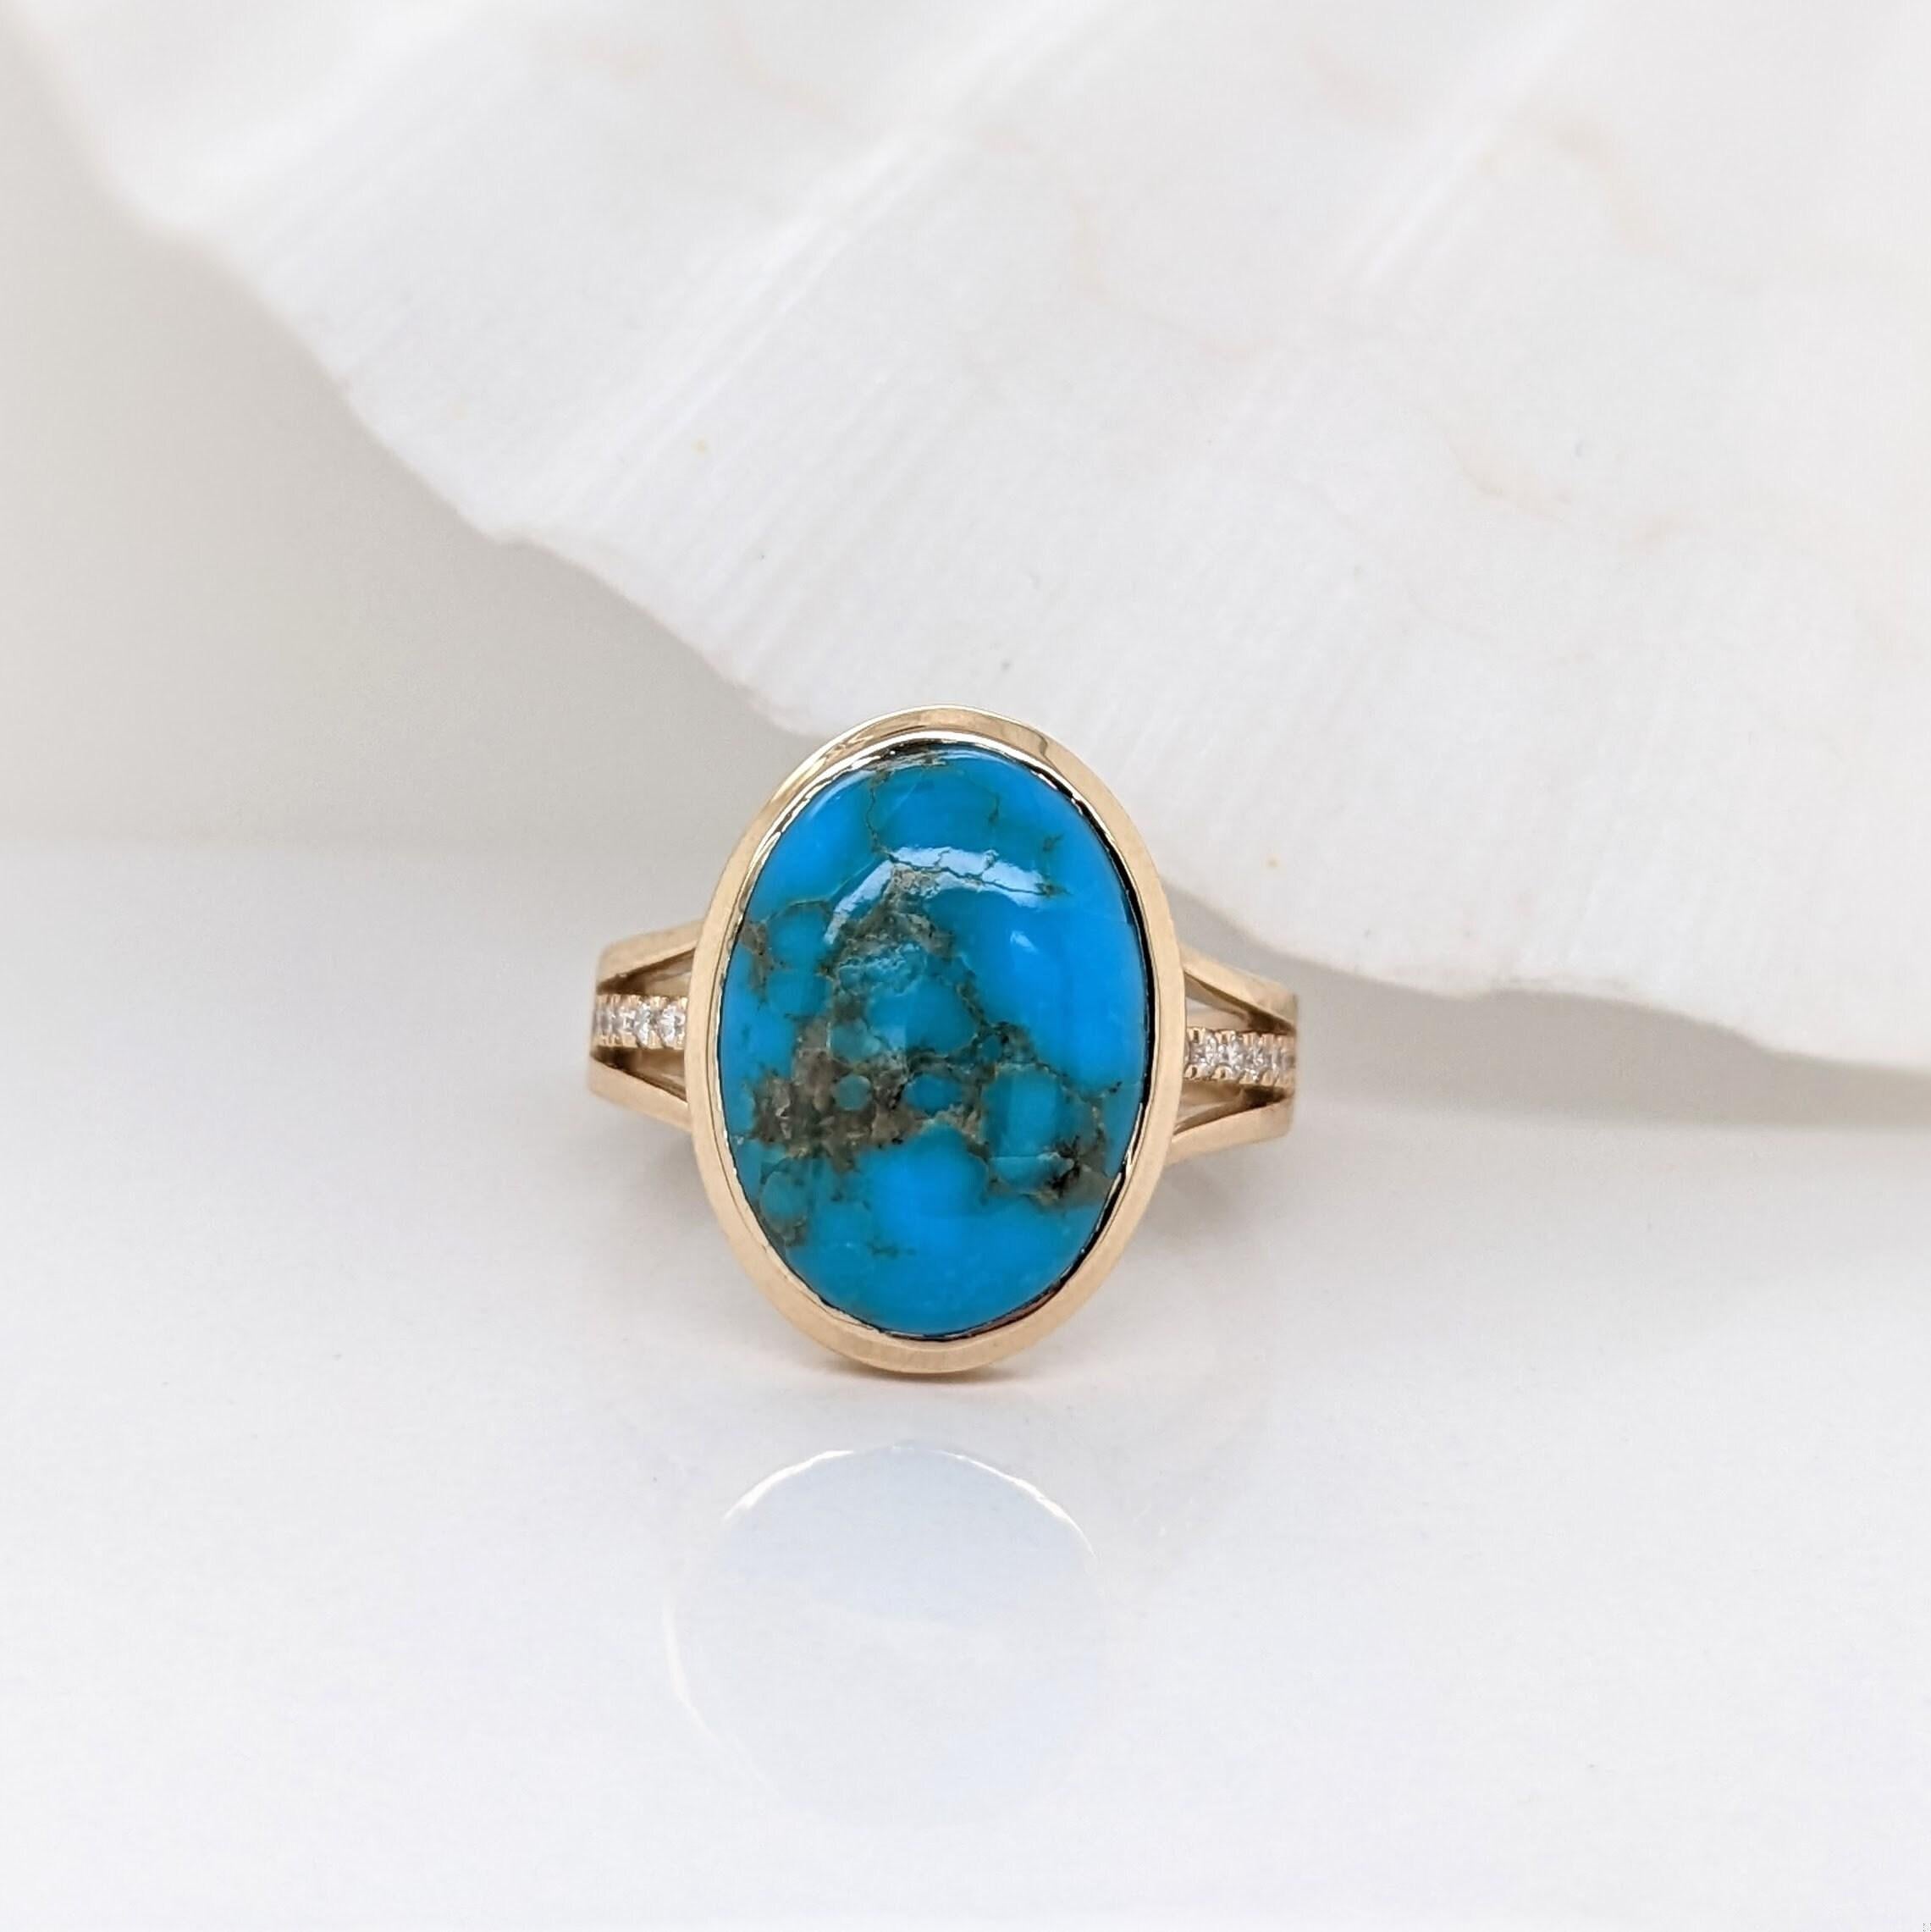 This 14k solid gold ring features a beautiful 16x12mm turquoise center stone with a Milgrain detail split shank. This unique piece is perfect for daily wear!

Specifications

Item Type: Ring
Center Stone: Turquoise
Treatment: